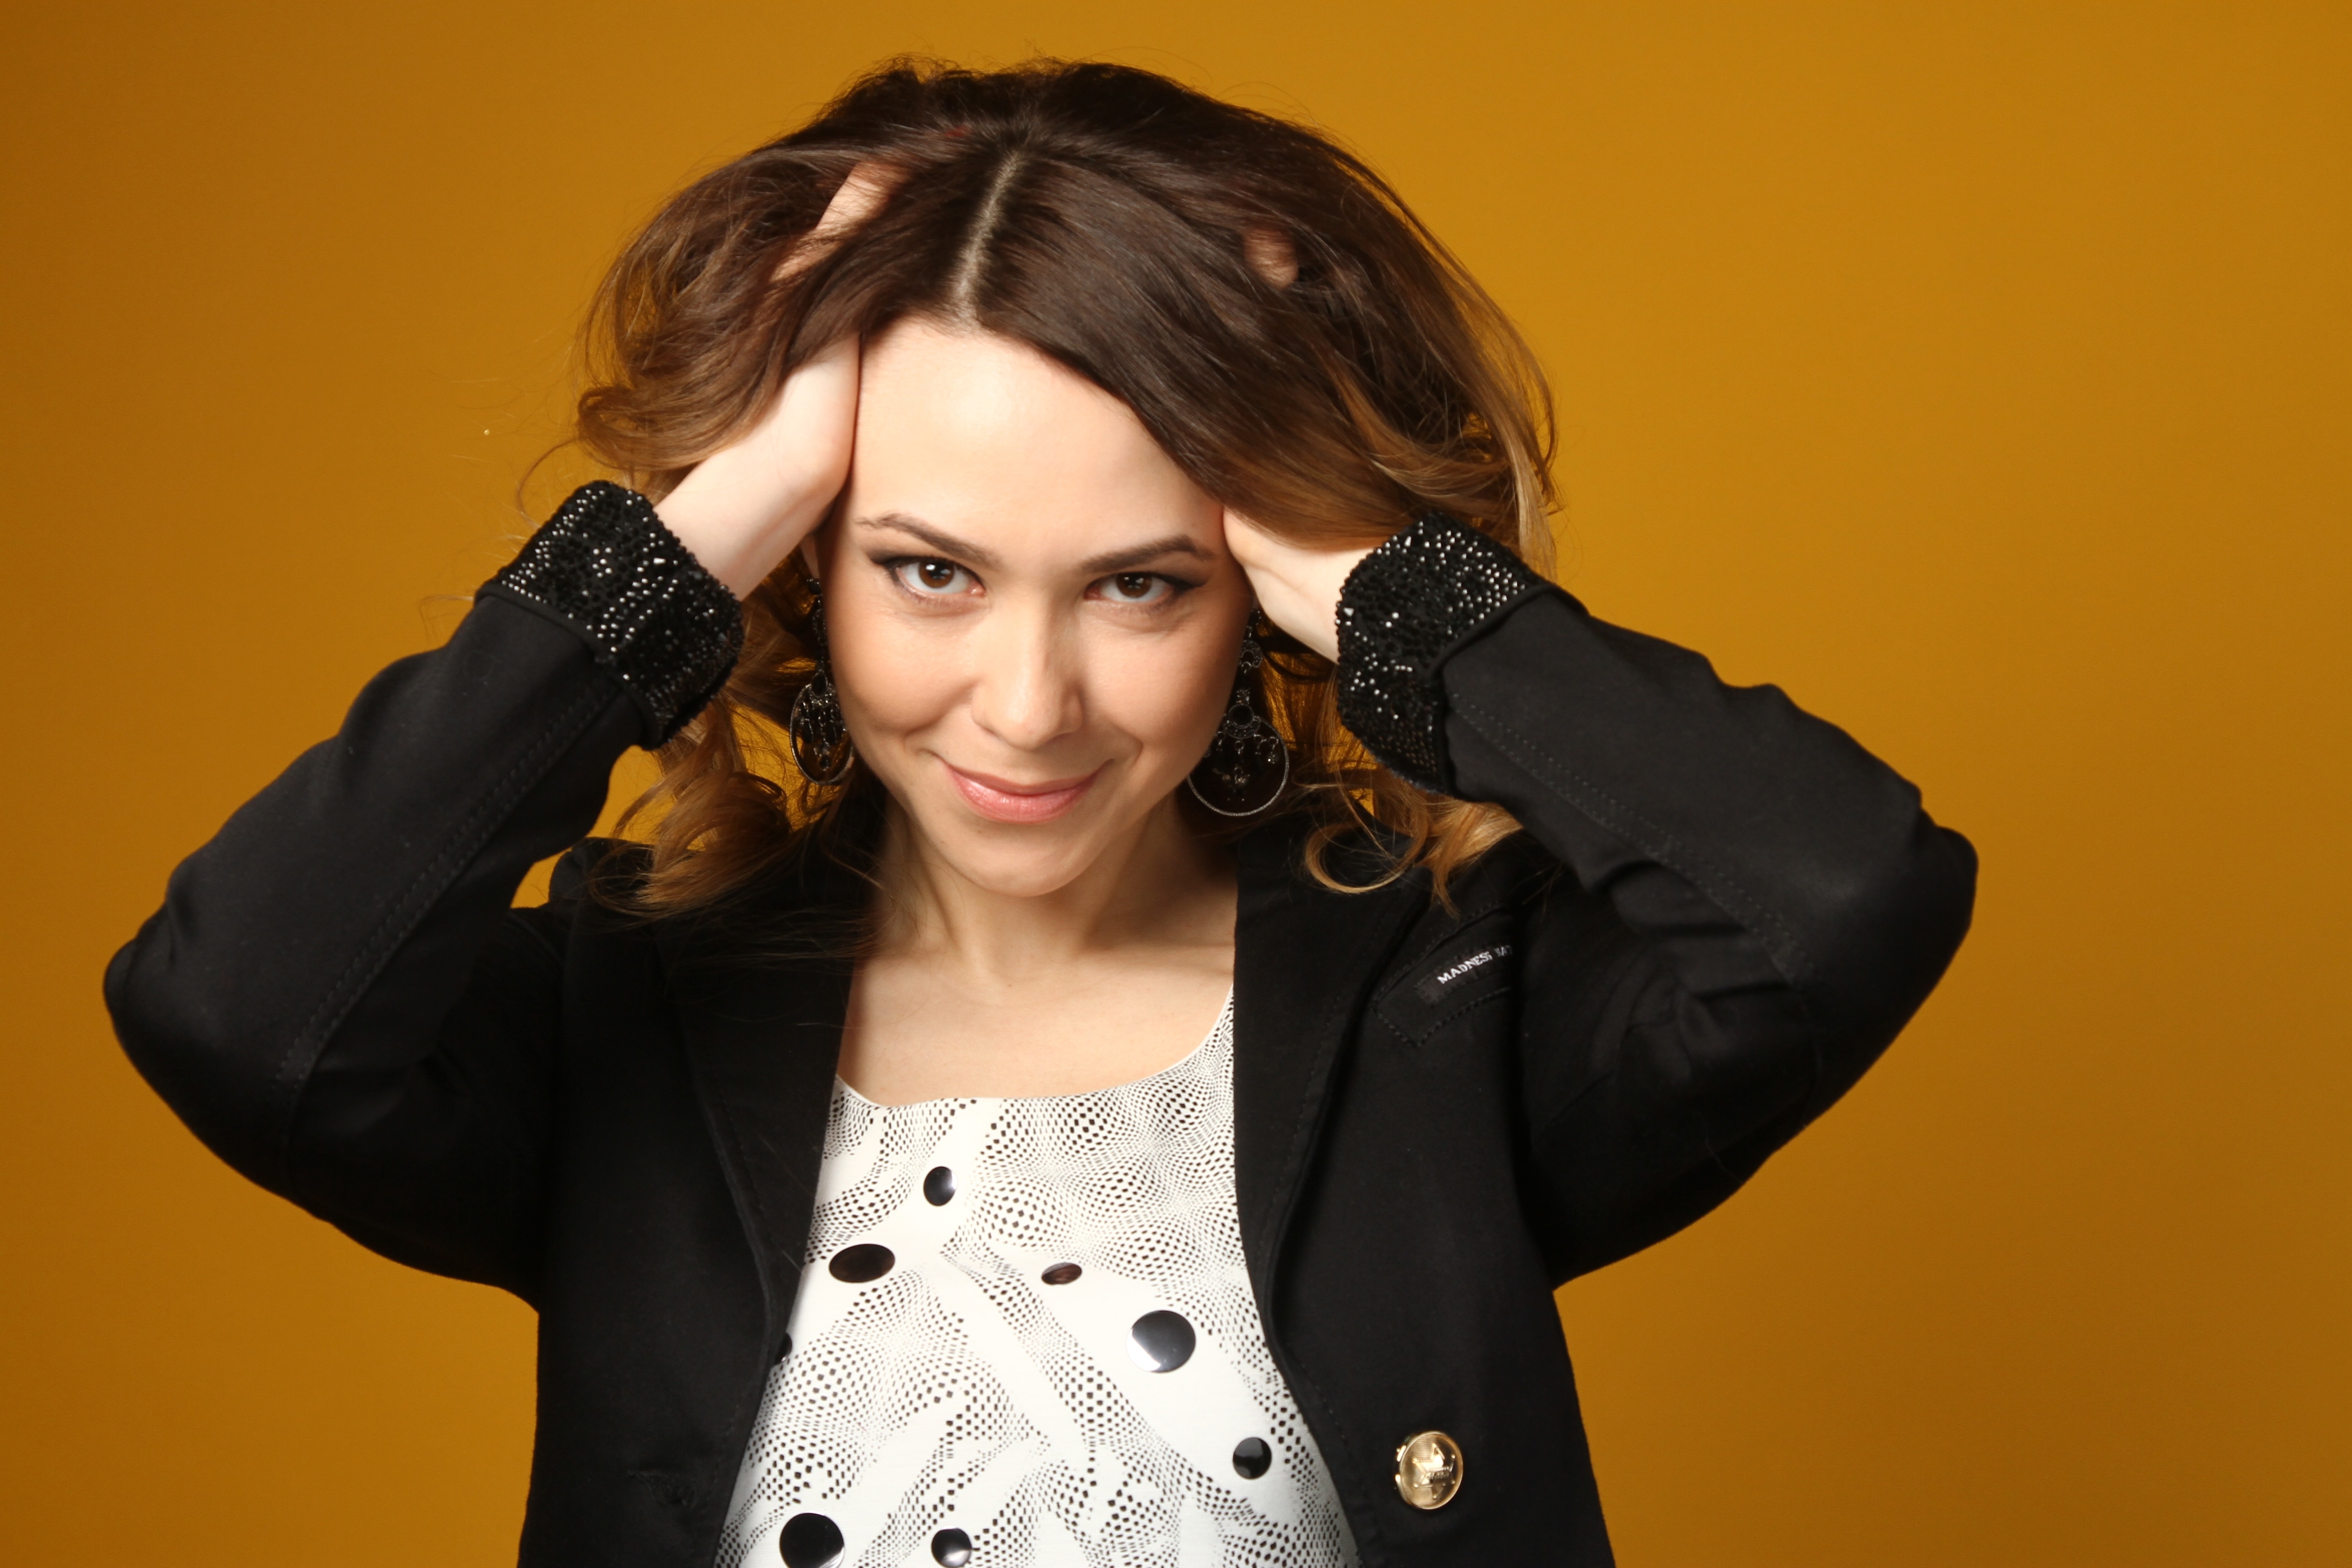 woman in black suit jacket holding brown hair taking photography